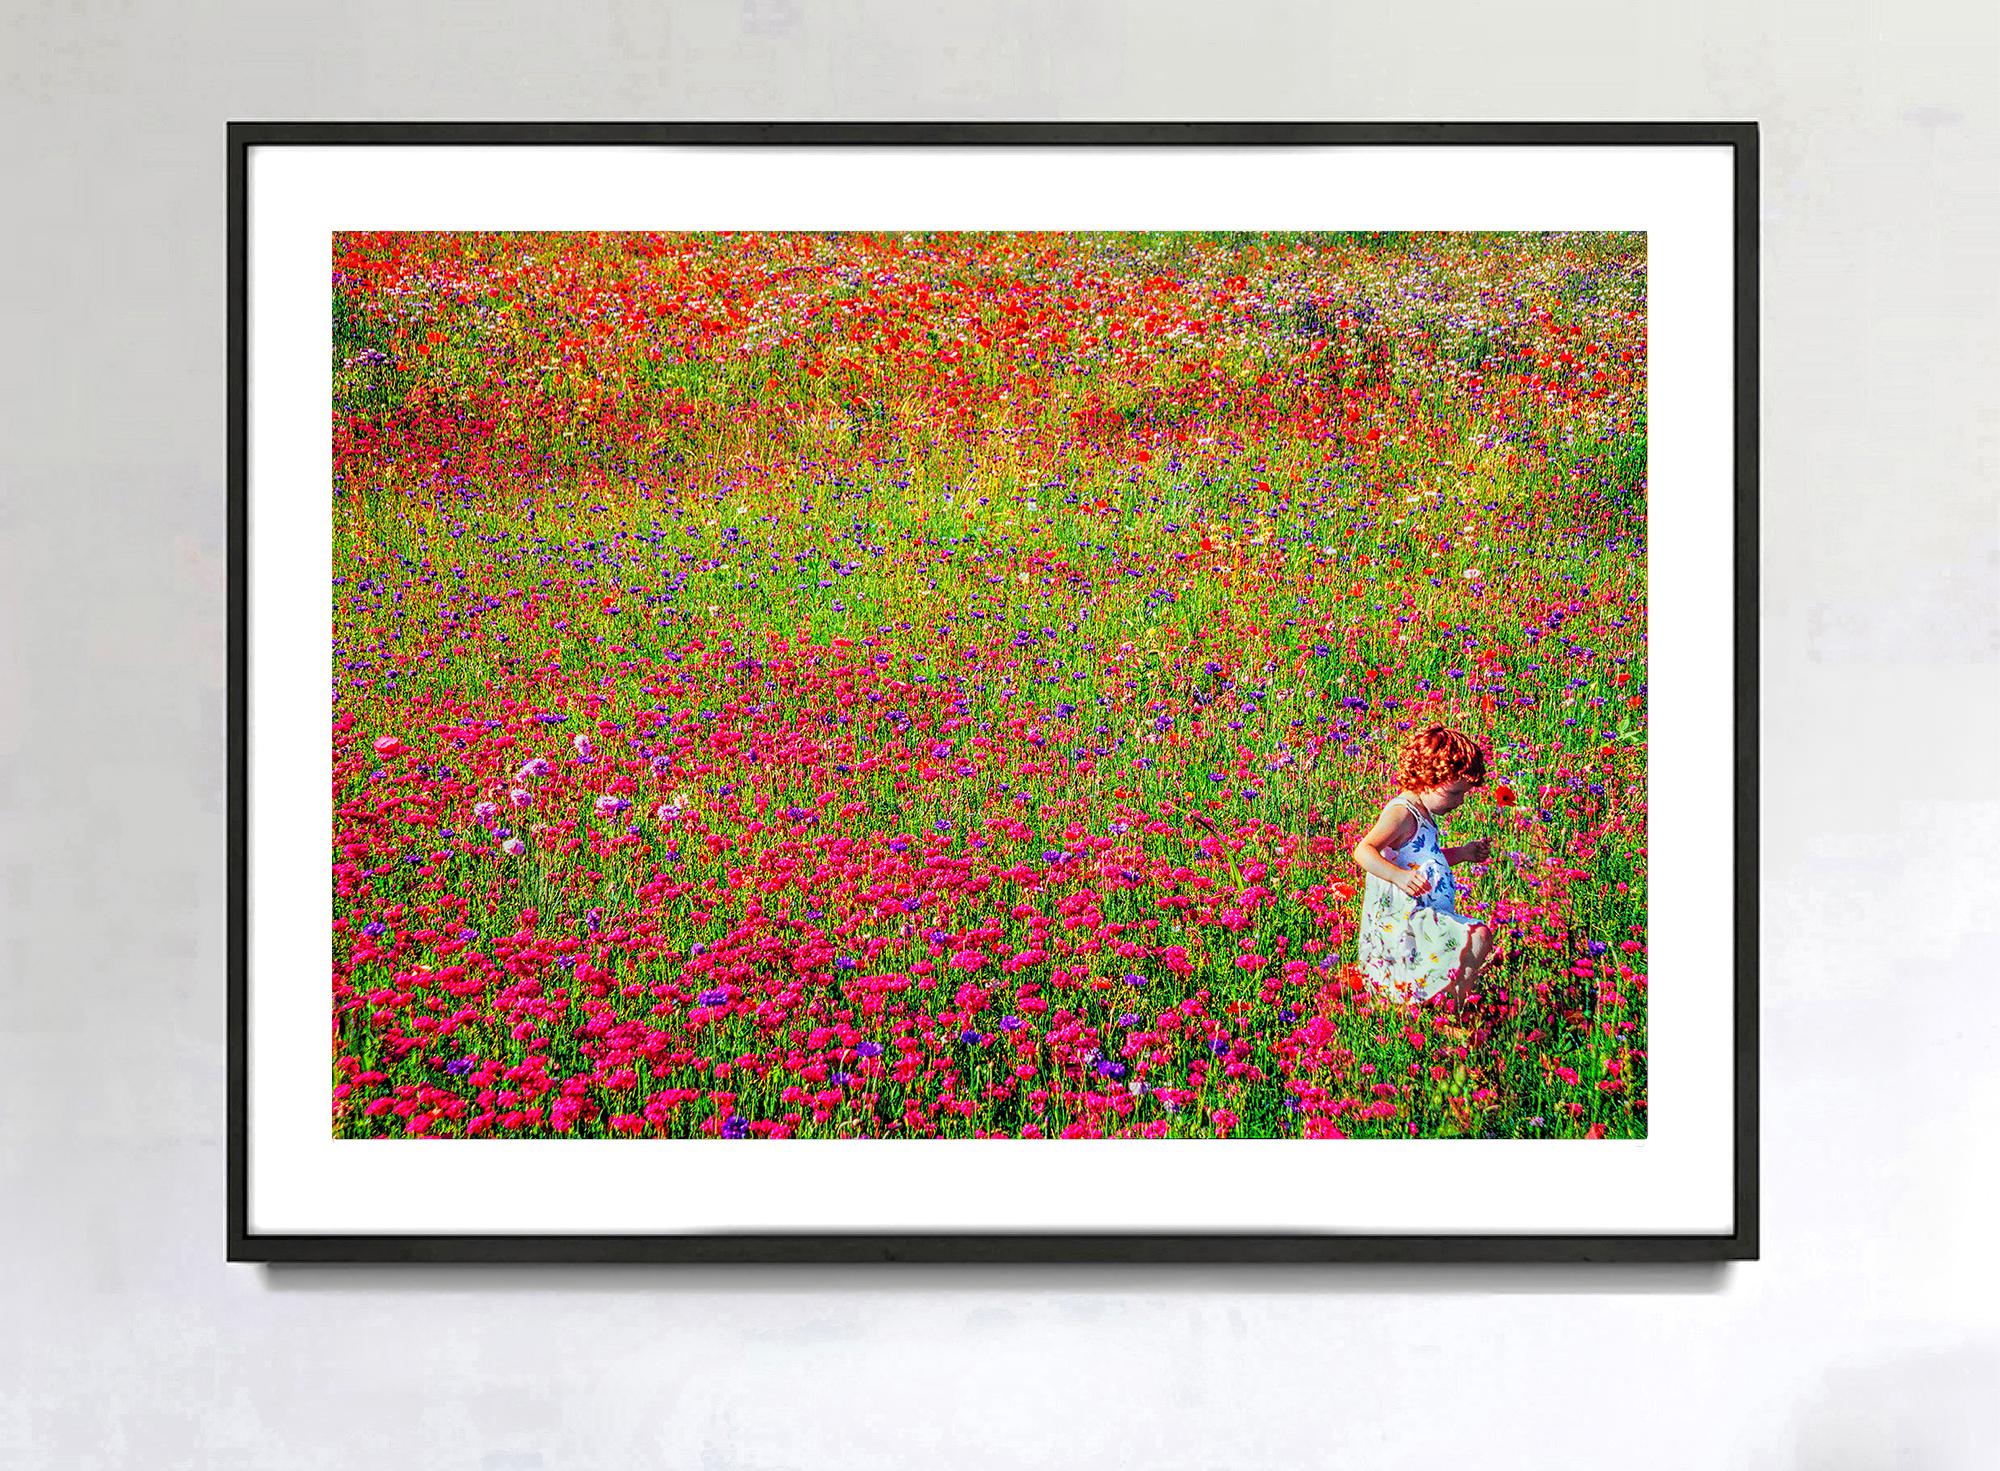 Colorful Field of Flowers with Redhead Child - East Hampton Like Monet - Photograph by Mitchell Funk